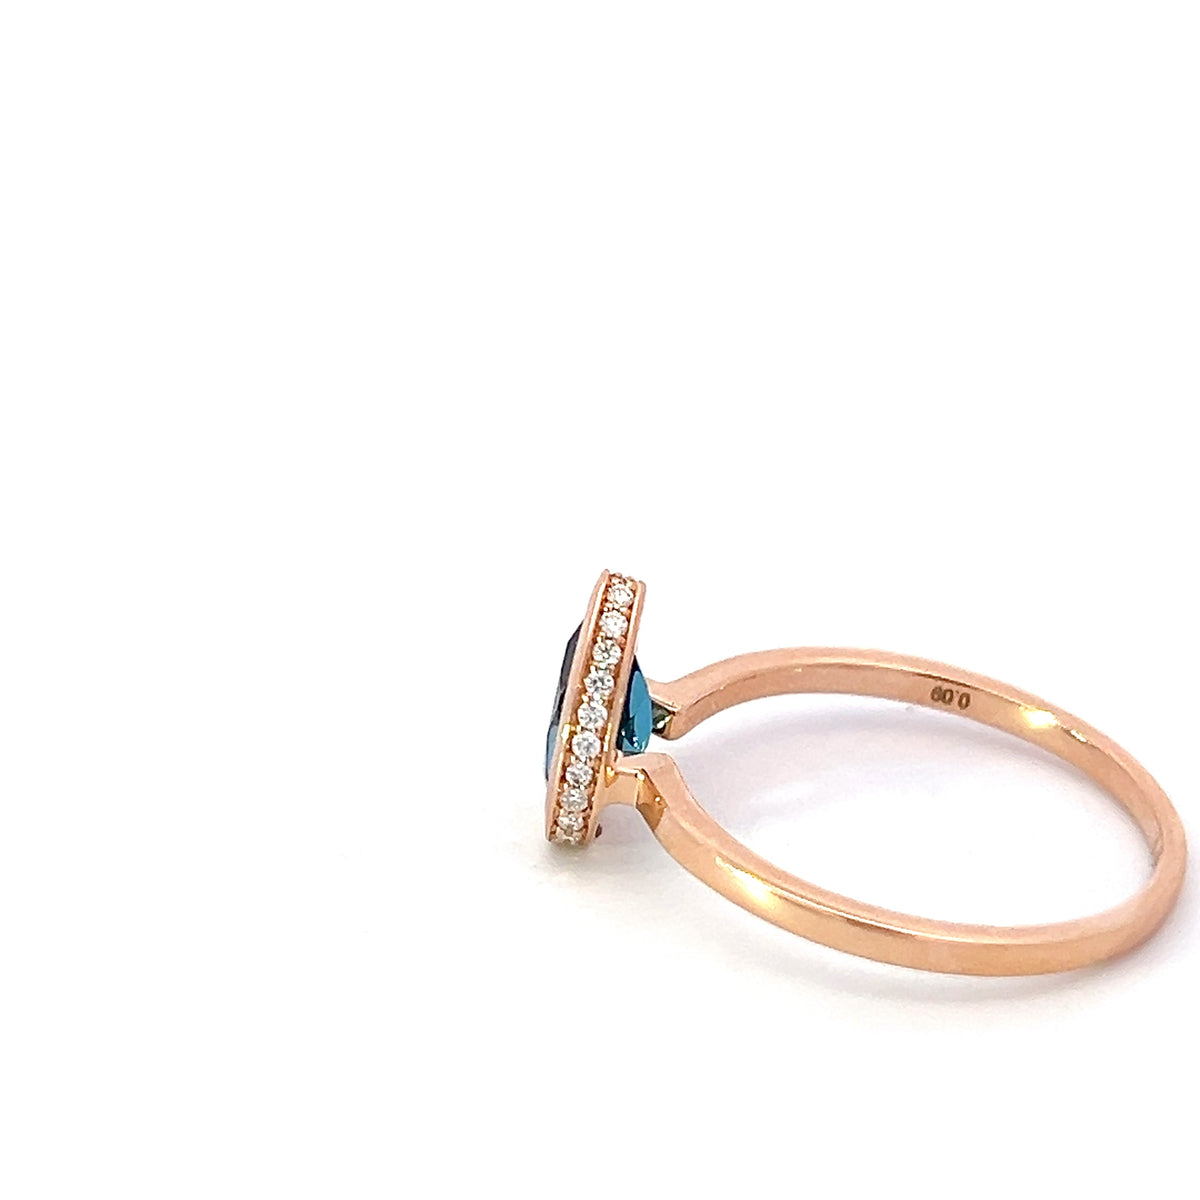 14K Rose Gold 0.91cttw Blue Topaz and 0.09cttw Diamond Ring - Size 6